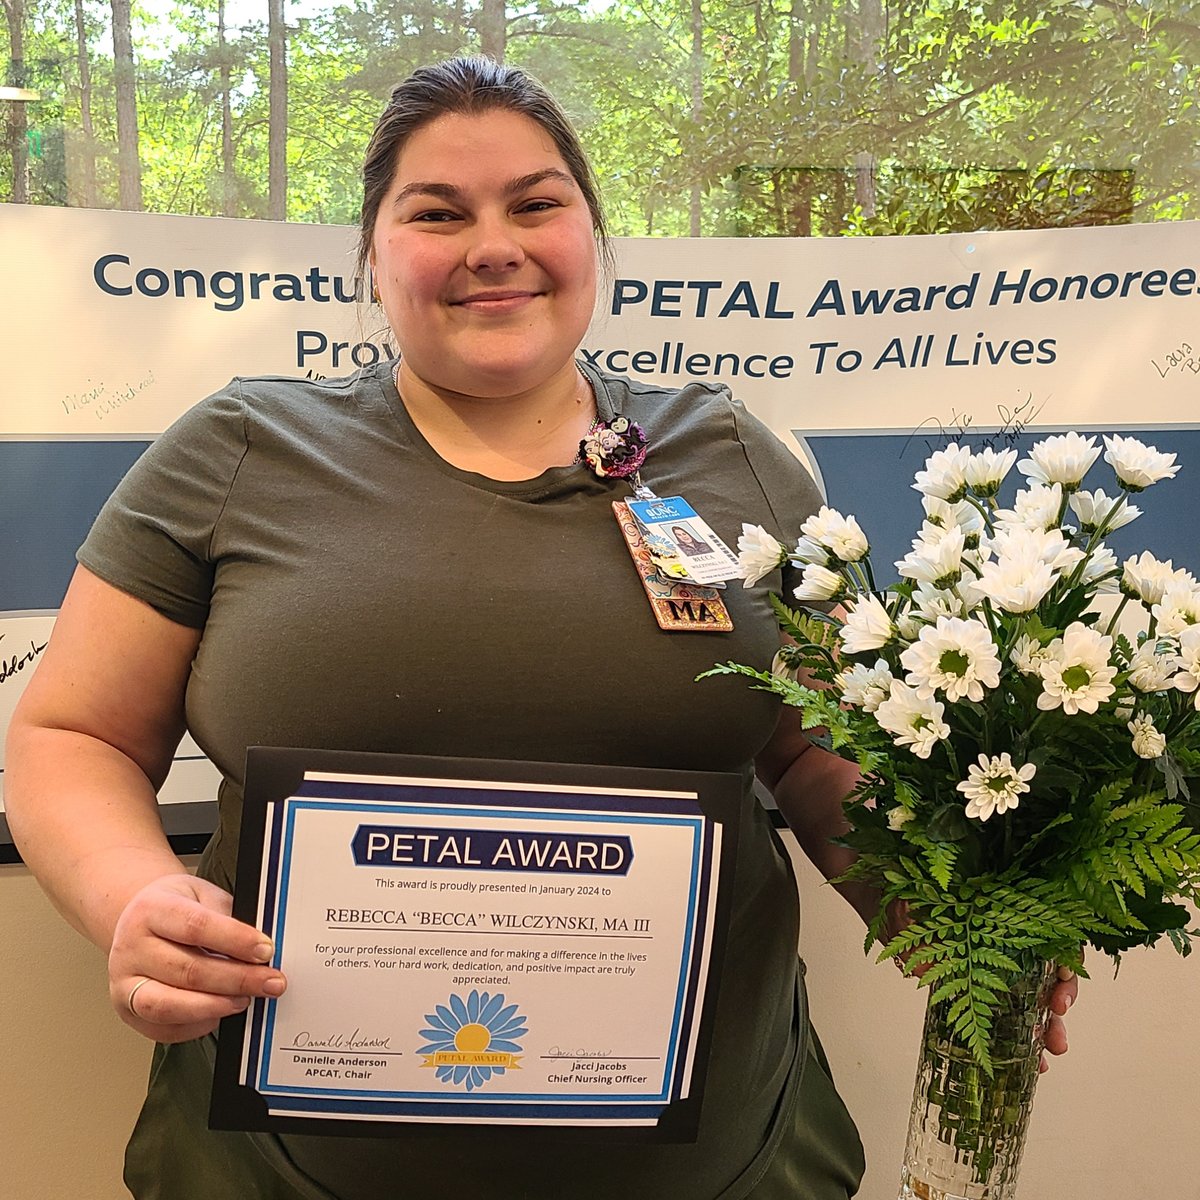 We're thrilled to share that our very own Becca Wilczynski has been honored with a PETALS Award!

Congratulations, Becca, on this well-deserved recognition!

#OneGreatTeam